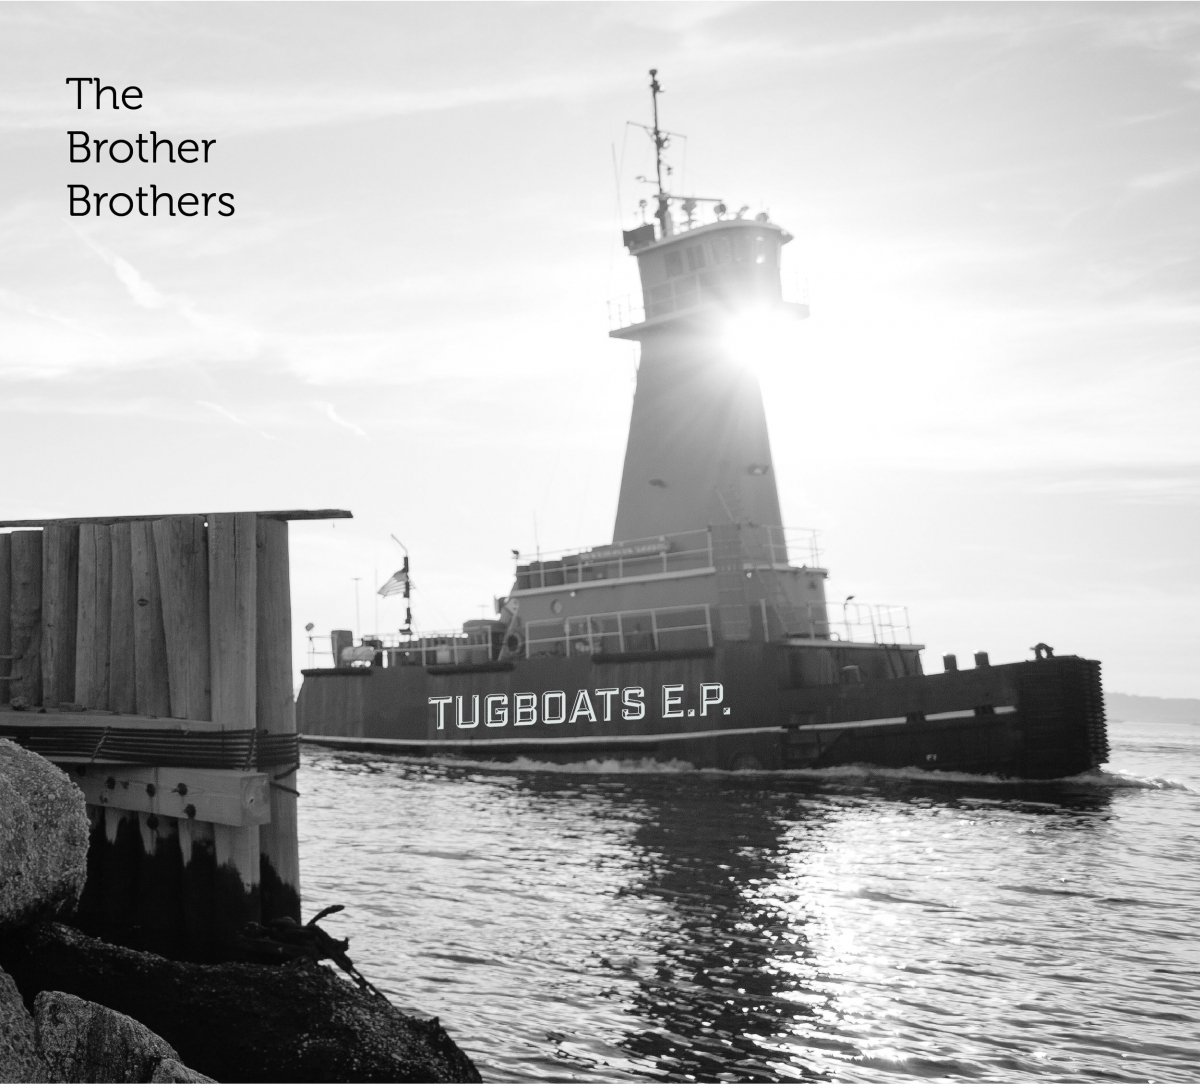 The Brother Brothers Tugboats E.P. album cover